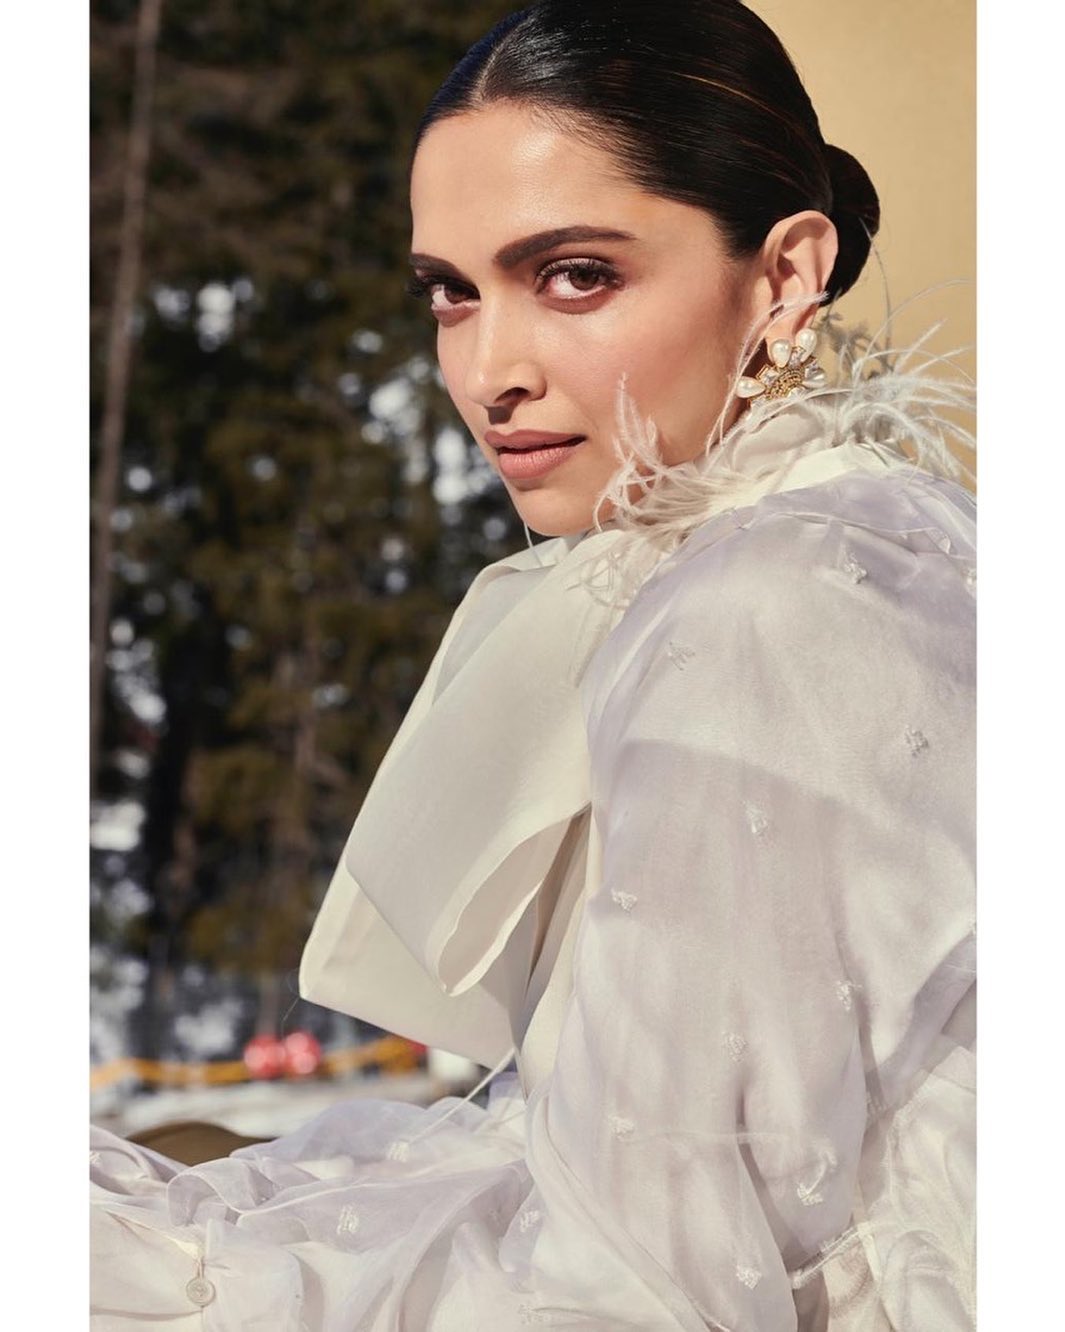 Deepika Padukone Becomes First Bollywood Star to Feature in Louis Vuitton's  Global Campaign - Masala